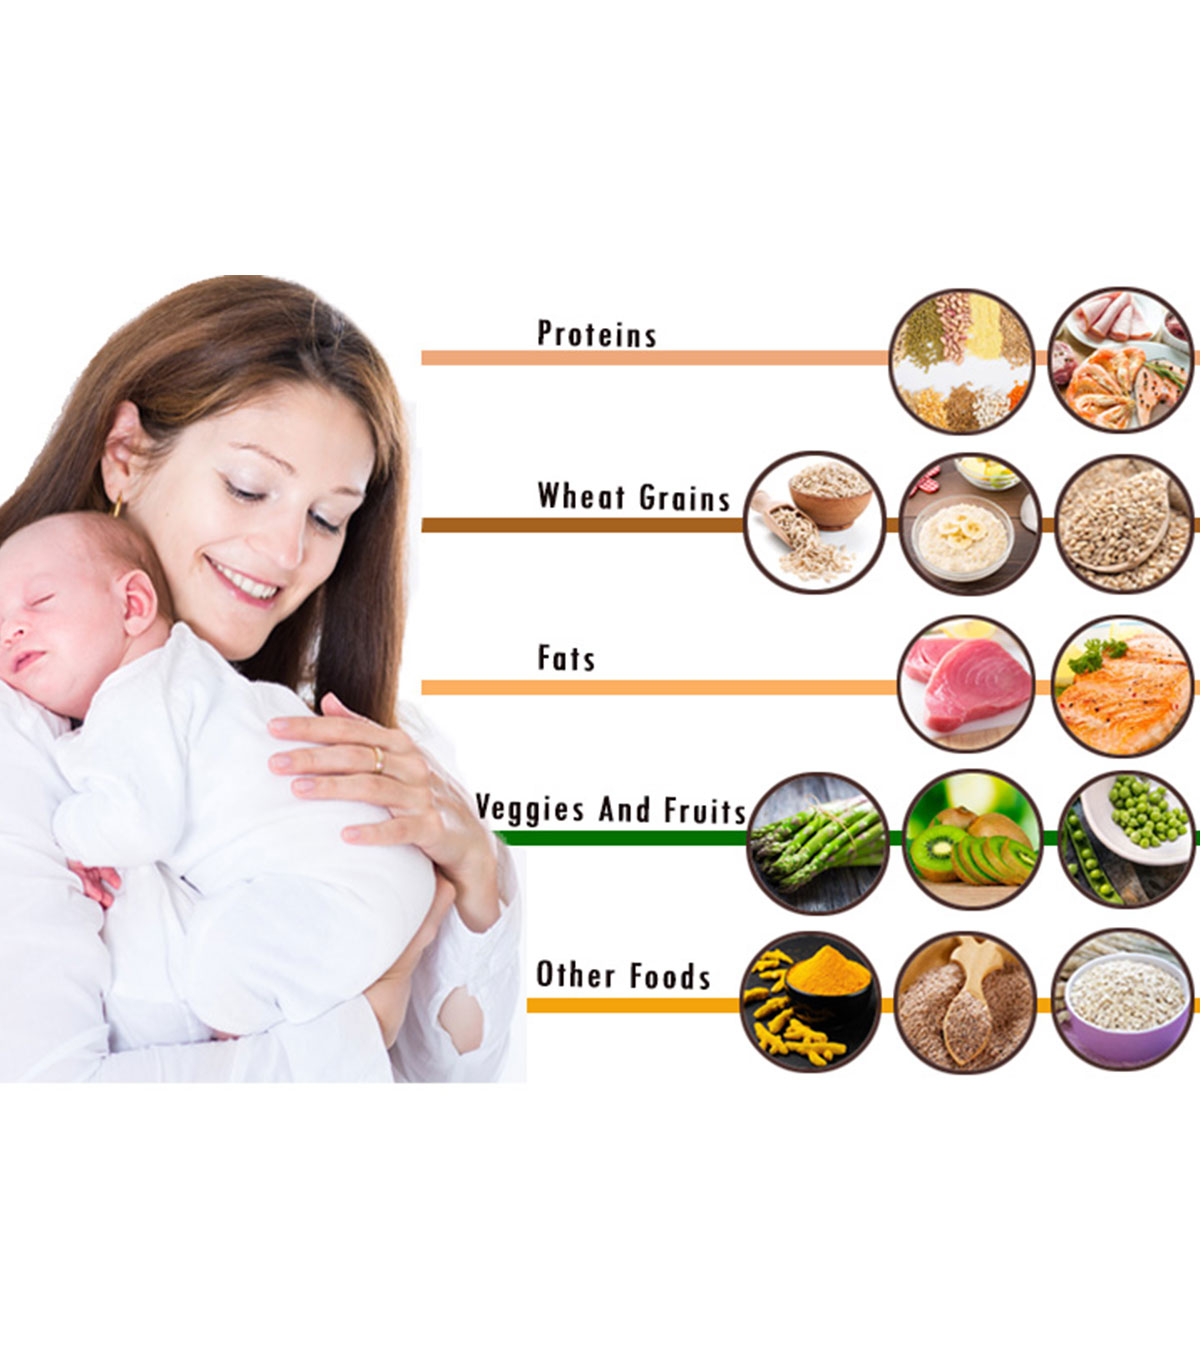 5 Healthy Food Options For New Moms After Delivery